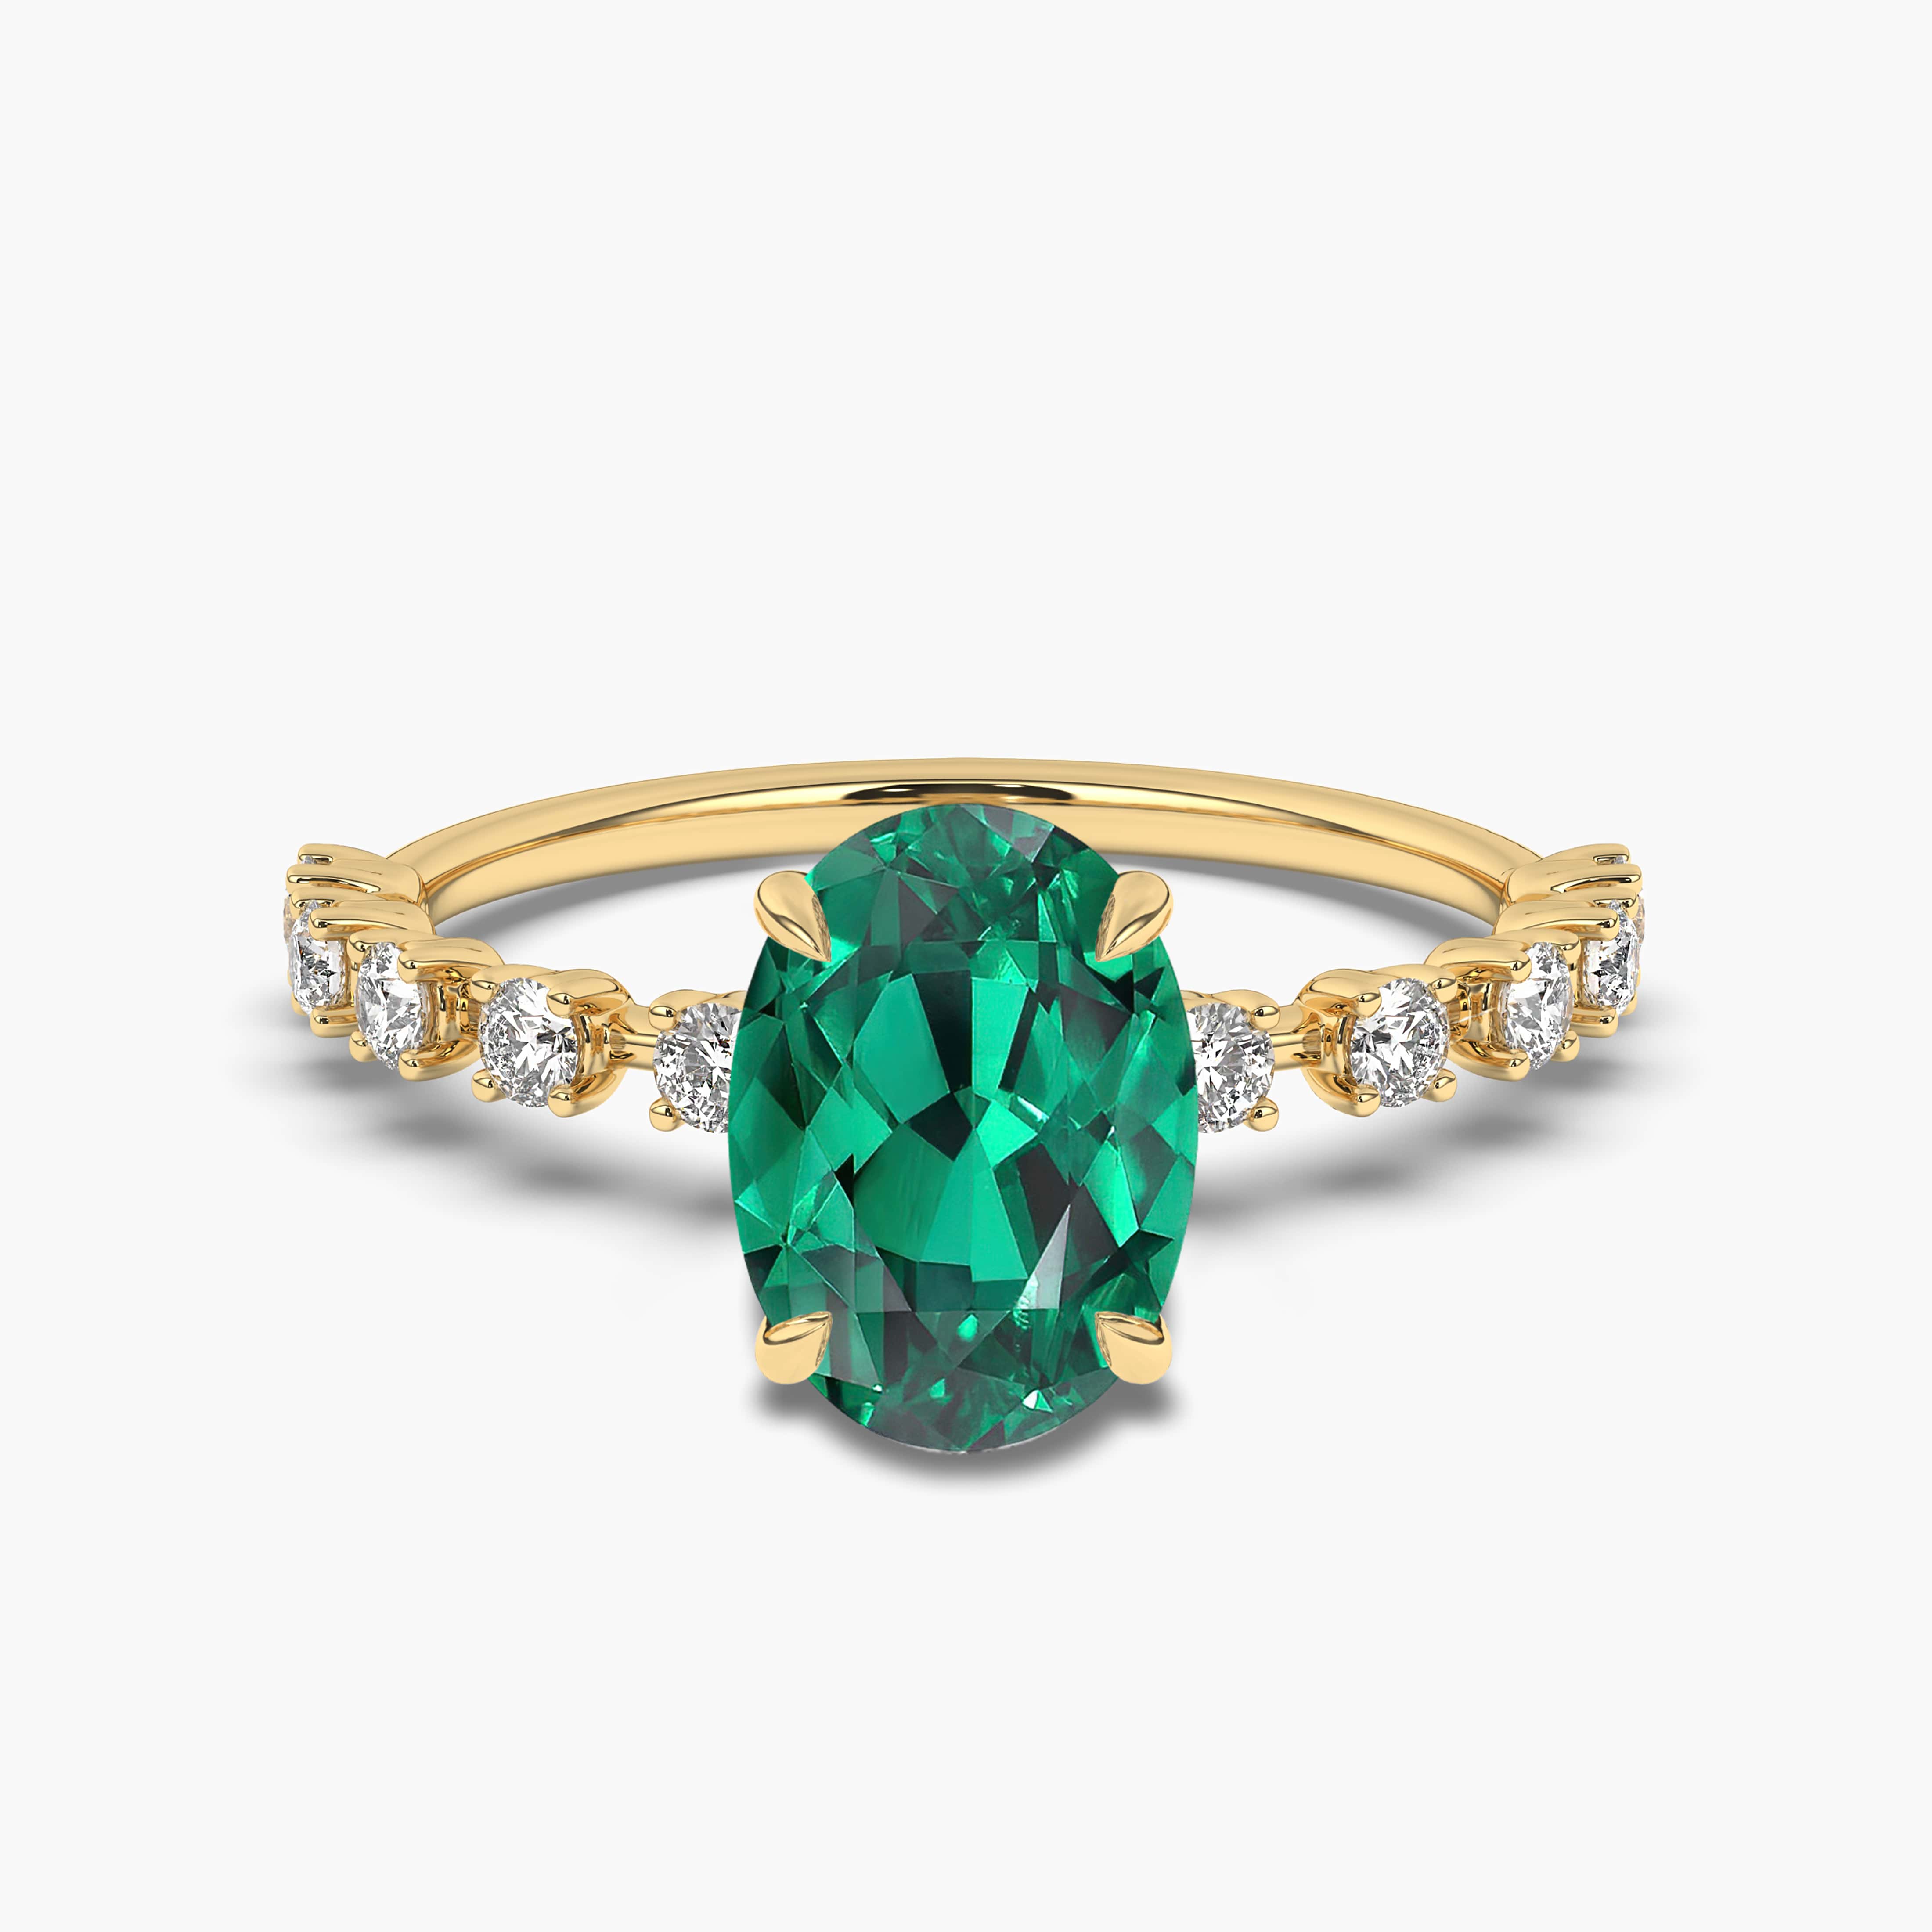 OVAL EMERALD AND DIAMOND RING IN YELLOW GOLD